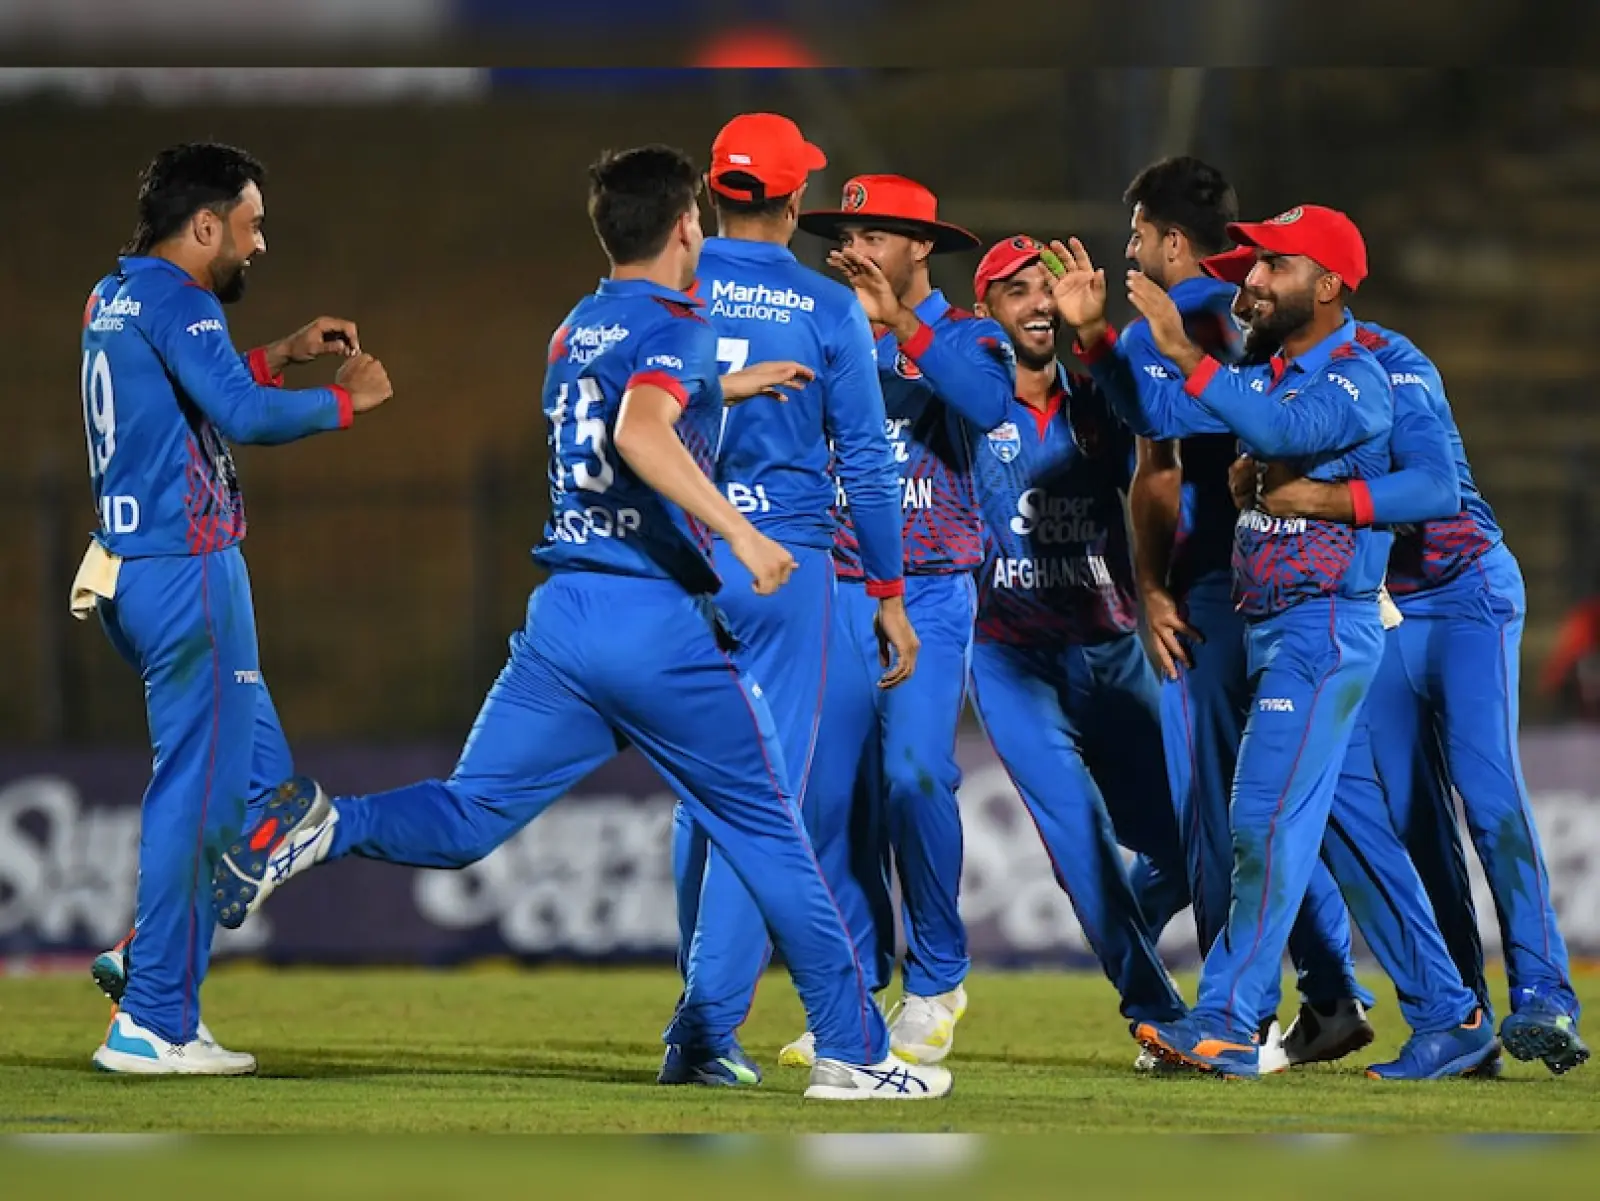 Afghanistan beat New Zealand badly and made a big upset in the T20 World Cup